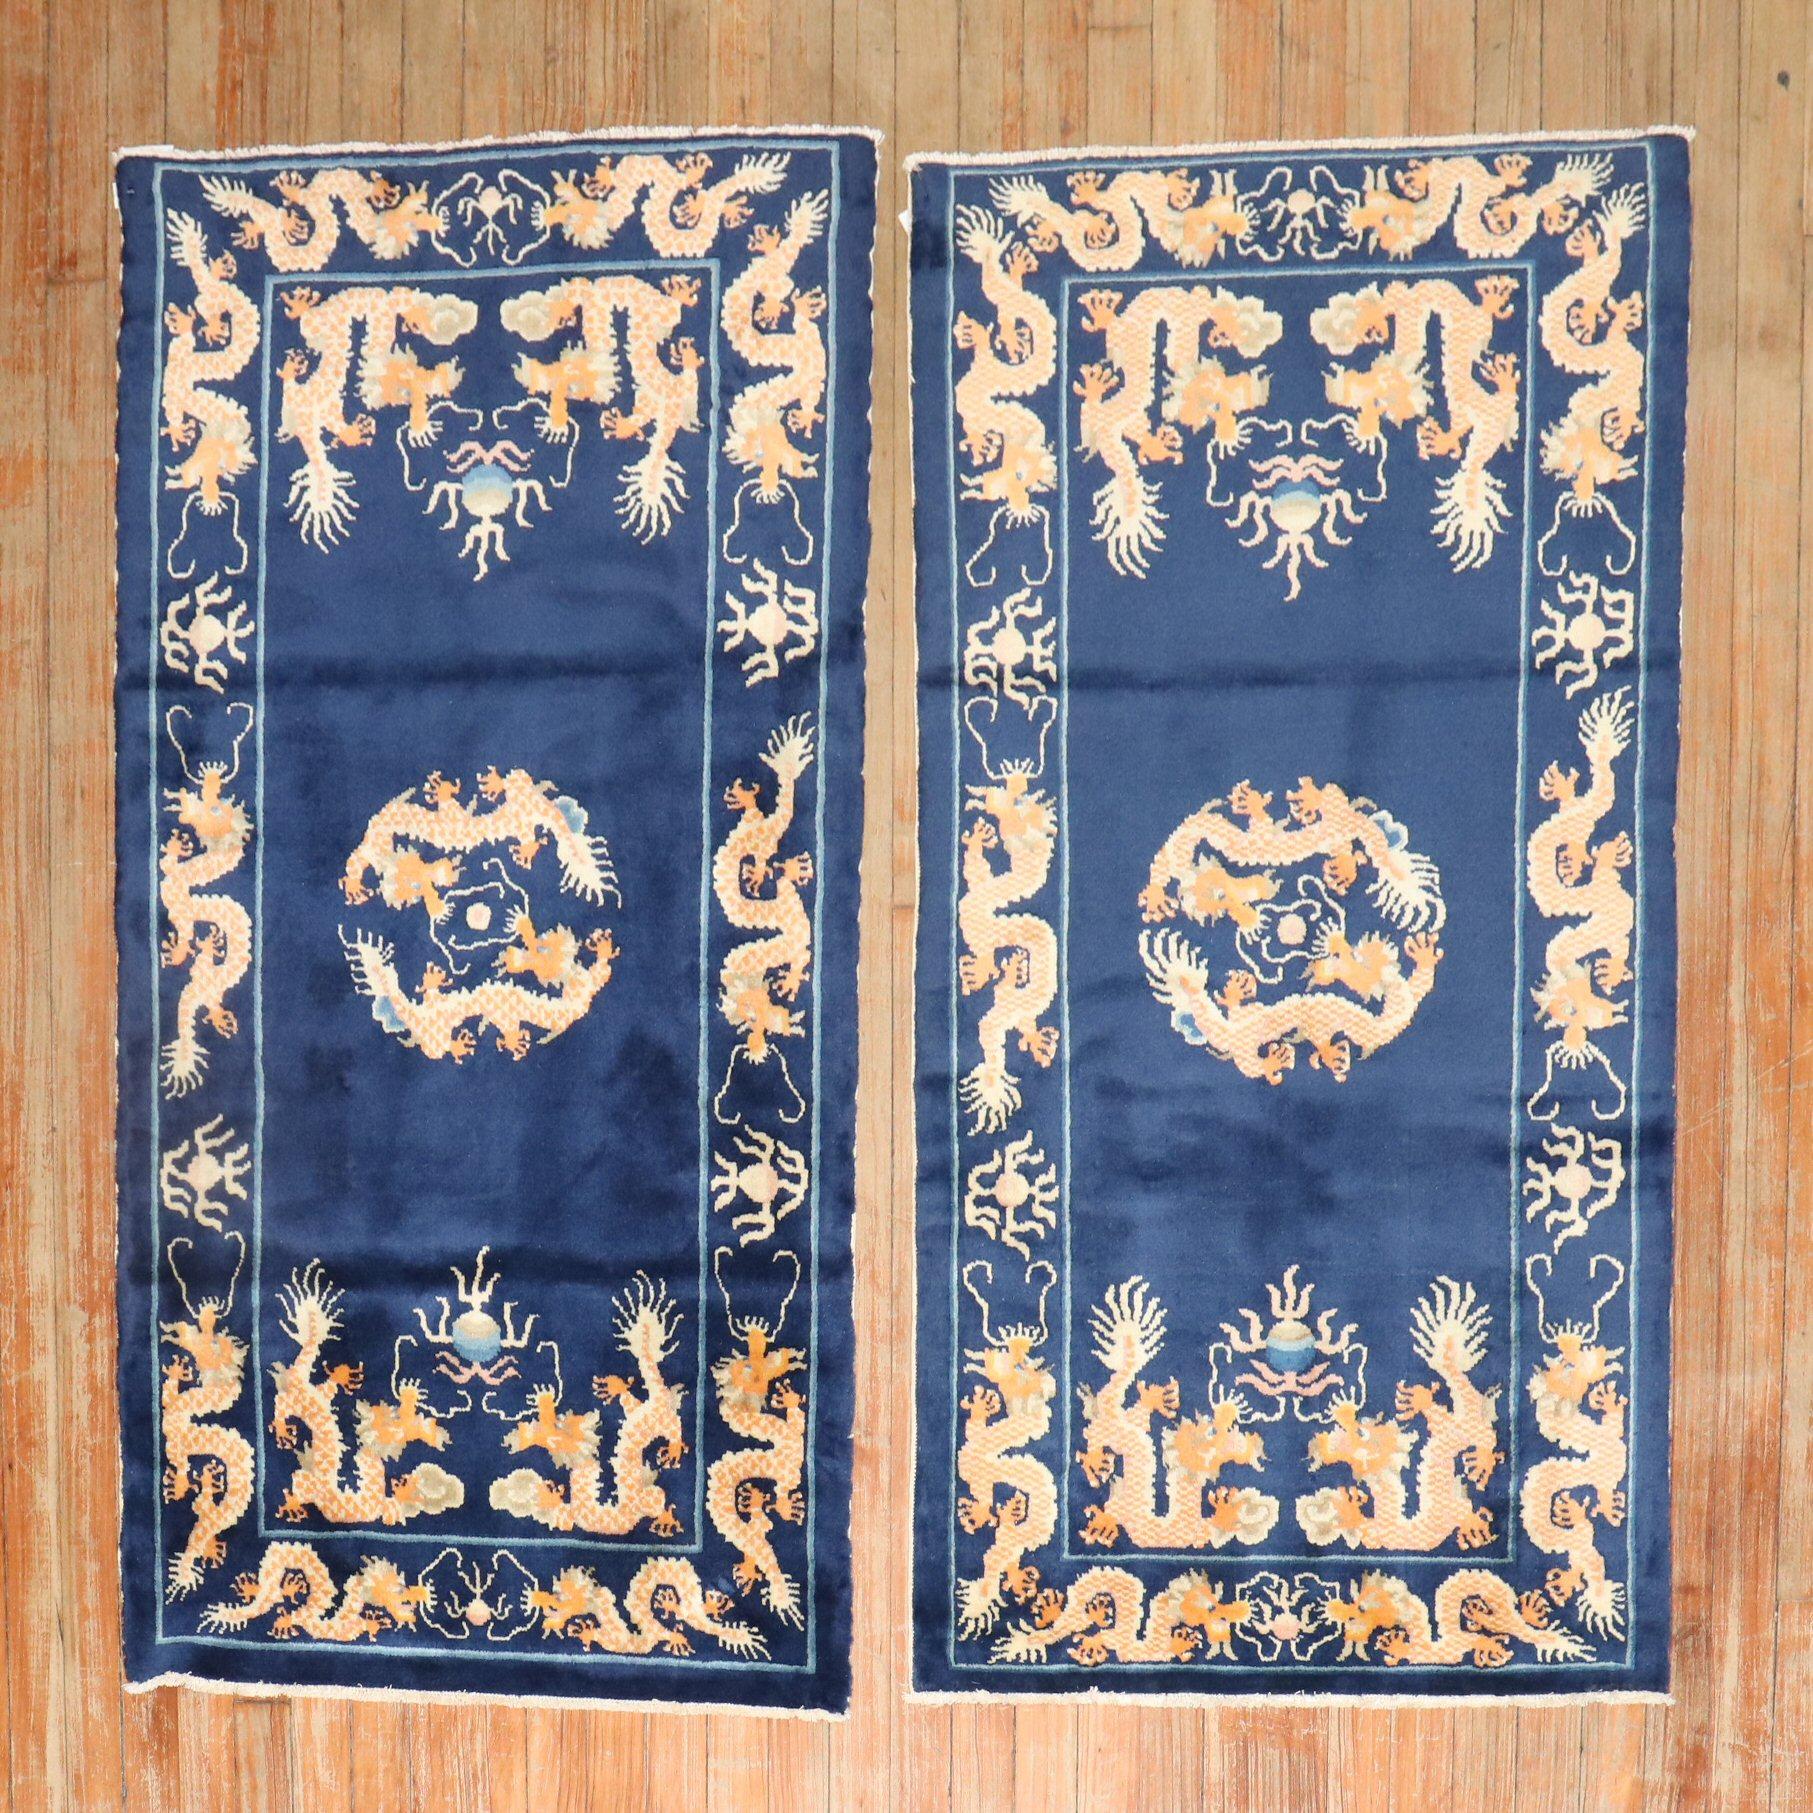 A matching pair of scatter-size Chinese rugs from the 3rd quarter of the 20th century.

Measuring 2'5'' x 4'7'' & 2'3'' x 4'5'' respectively.